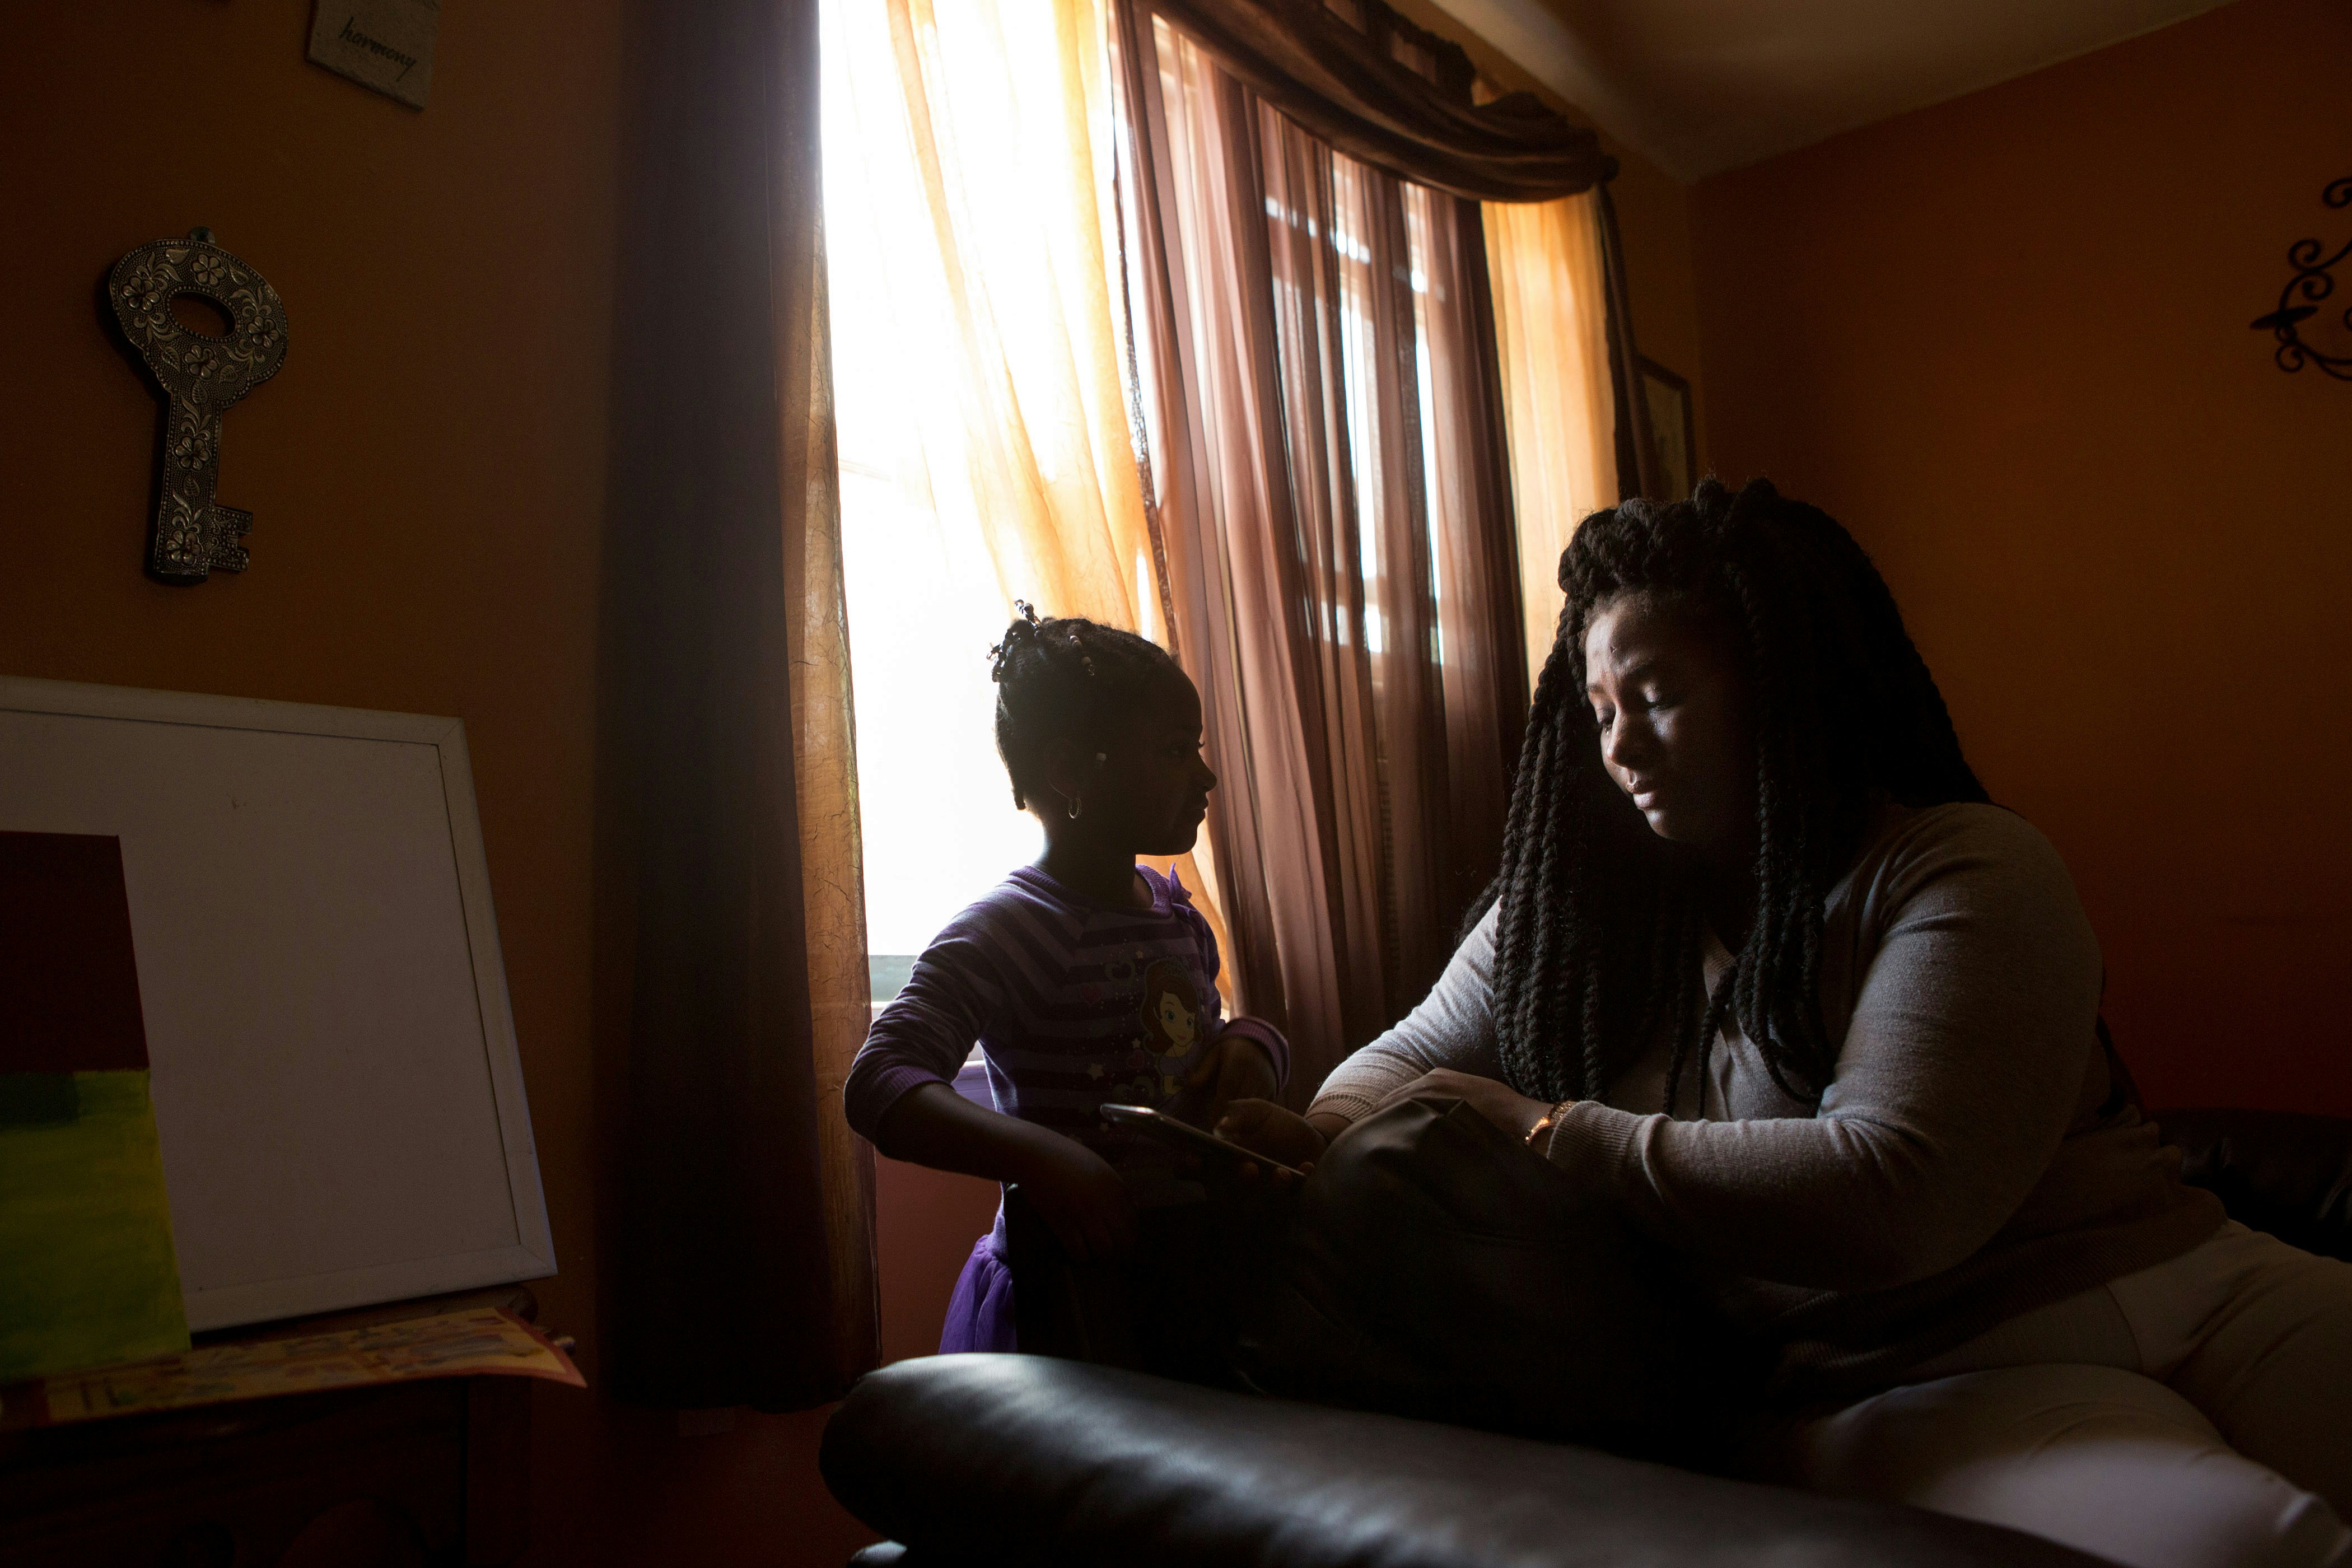 Kelly Holsey cries as she and her daughter Peyton Carter, 5, look at photos of her fiancÈ Keith Davis Jr. after his police encounter at Holsey's mother's home in the suburbs of Baltimore, Maryland, April 23, 2016. Davis was shot by police and is now in prison charged with murder-- all unfairly according to Holsey. Holsey and her daughter drew henna tattoos with Davis' name on their arms. (photo by Allison Shelley)